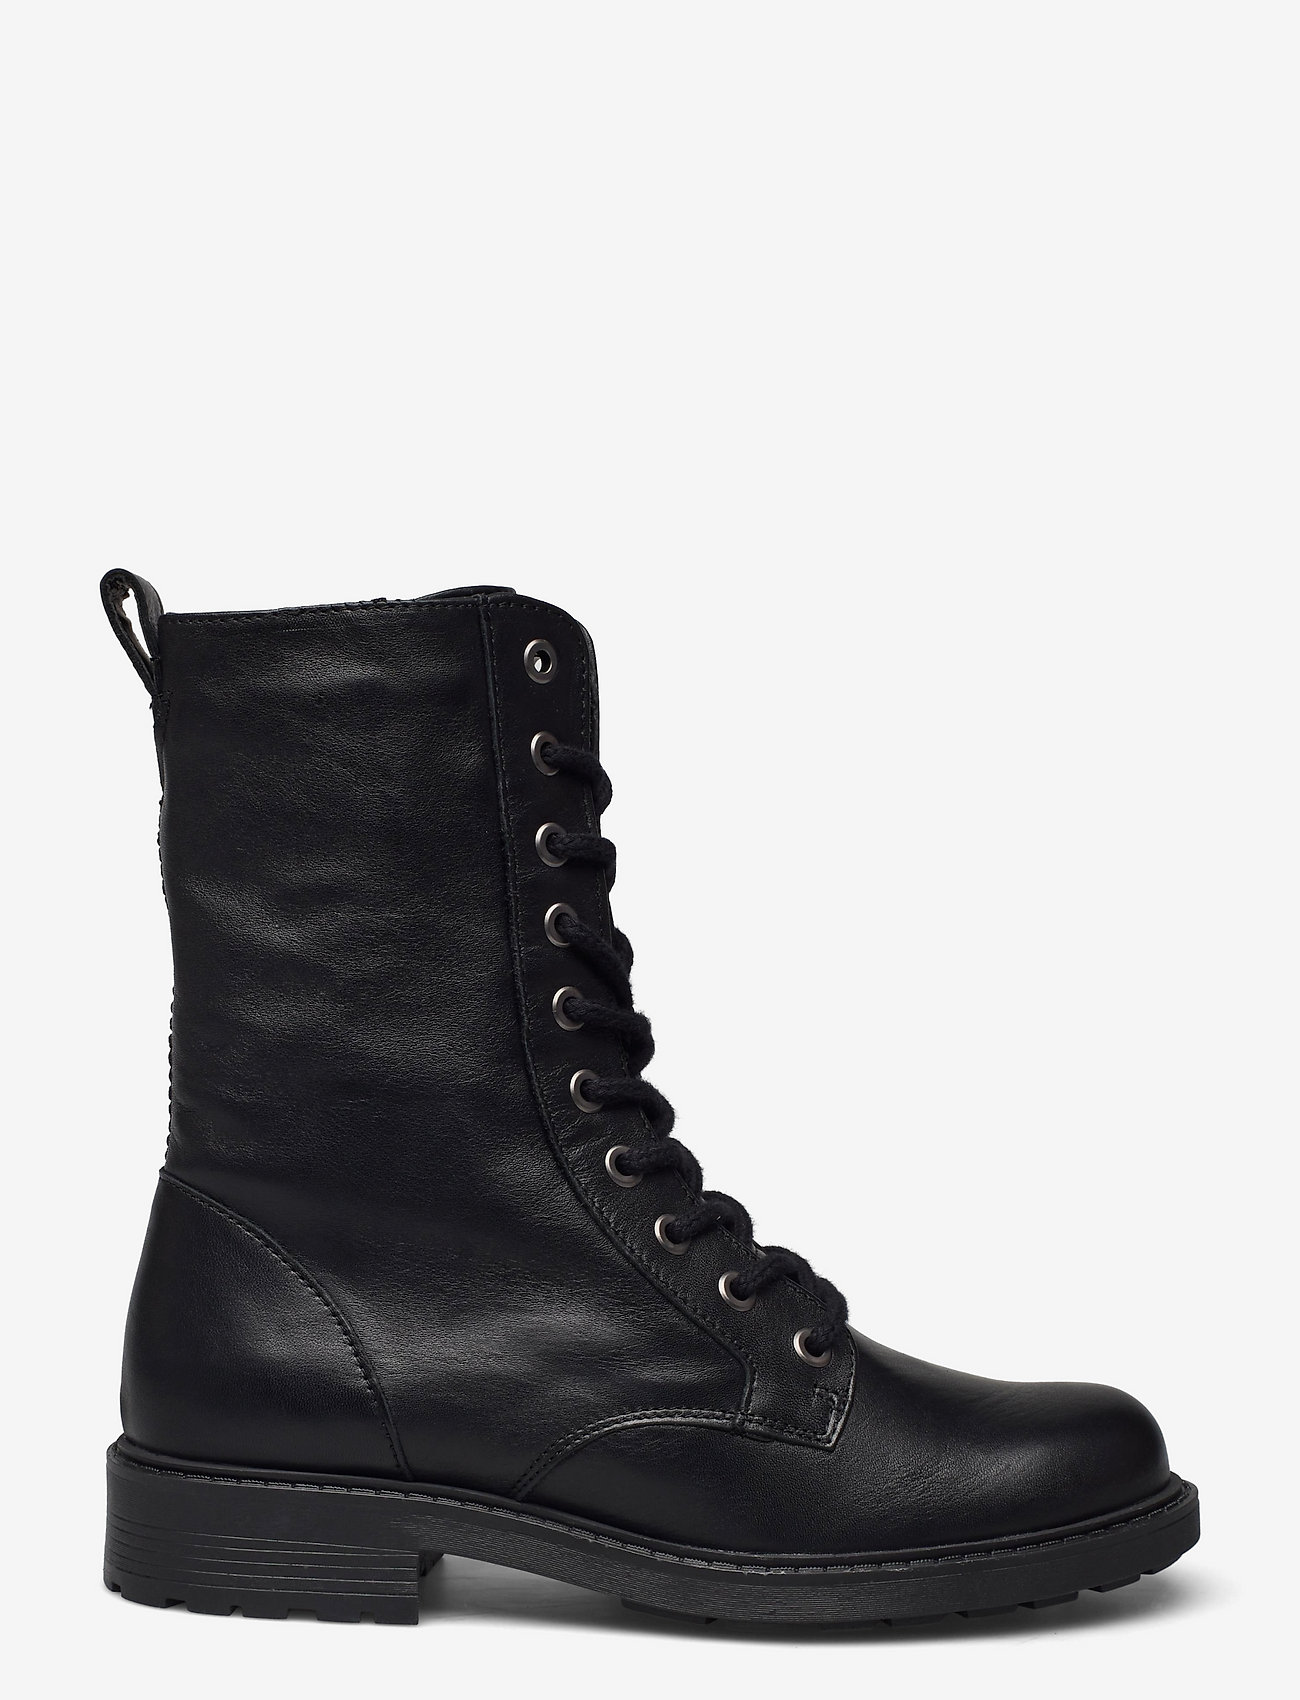 Clarks - Orinoco2 Style - laced boots - black leather - 1